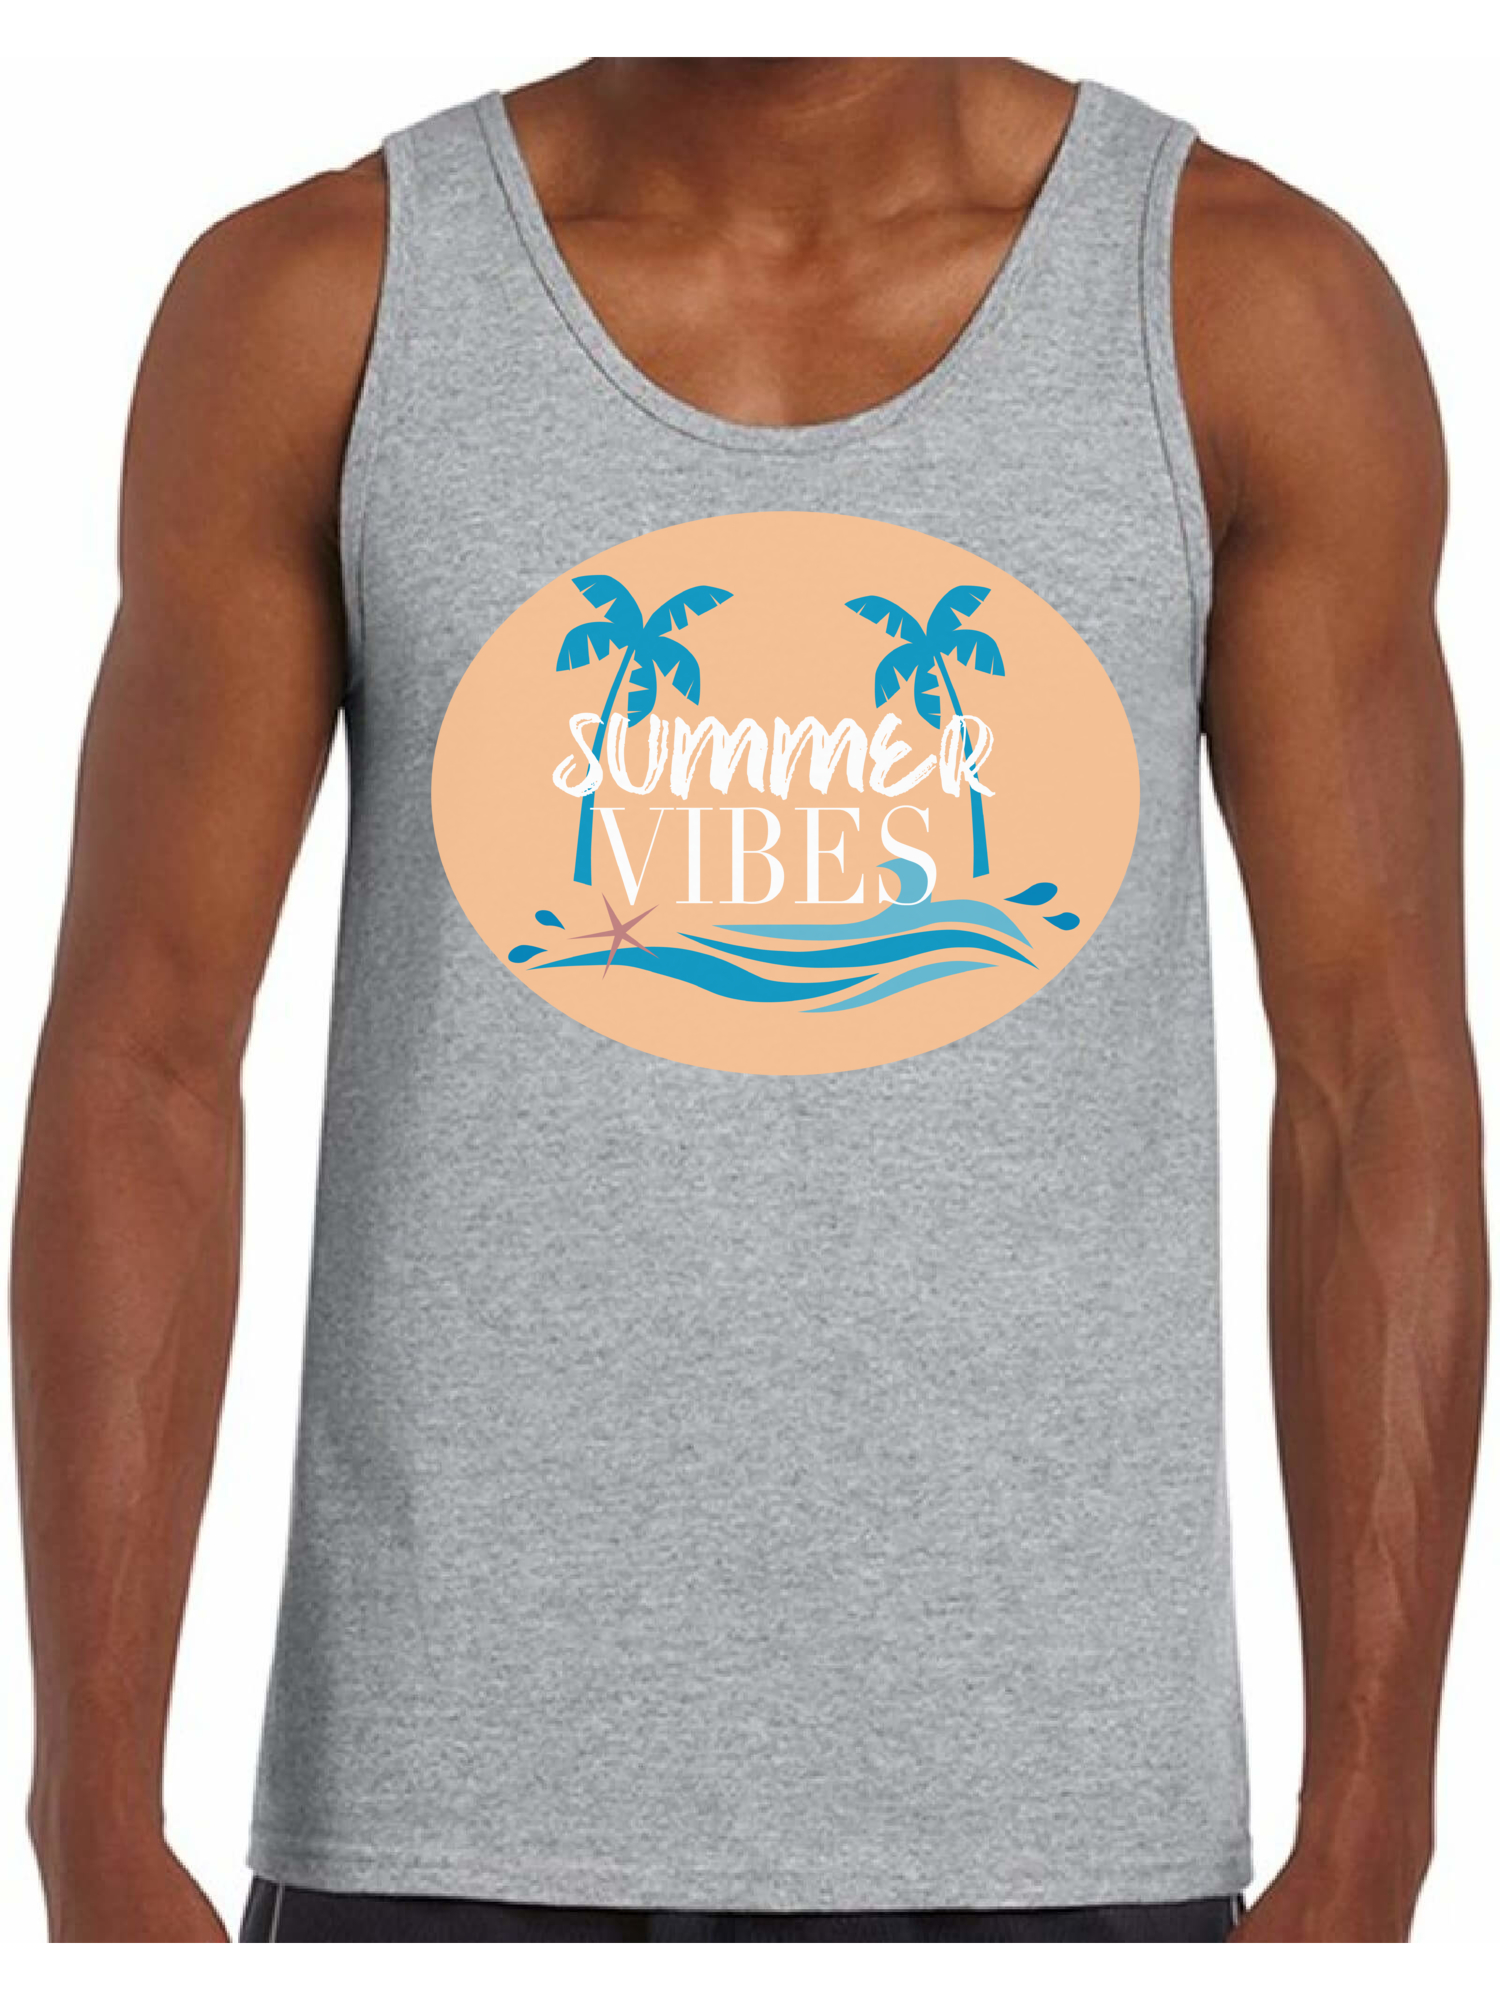 Awkward Styles Palms Shirt Vacay Vibes Clothing Collection for Men Beach Tank Top for Men Vacay Vibes Shirts Summer Vibes Clothes for Men Summer Tank Top Beach Tshirt for Men Beach Gifts - image 1 of 4